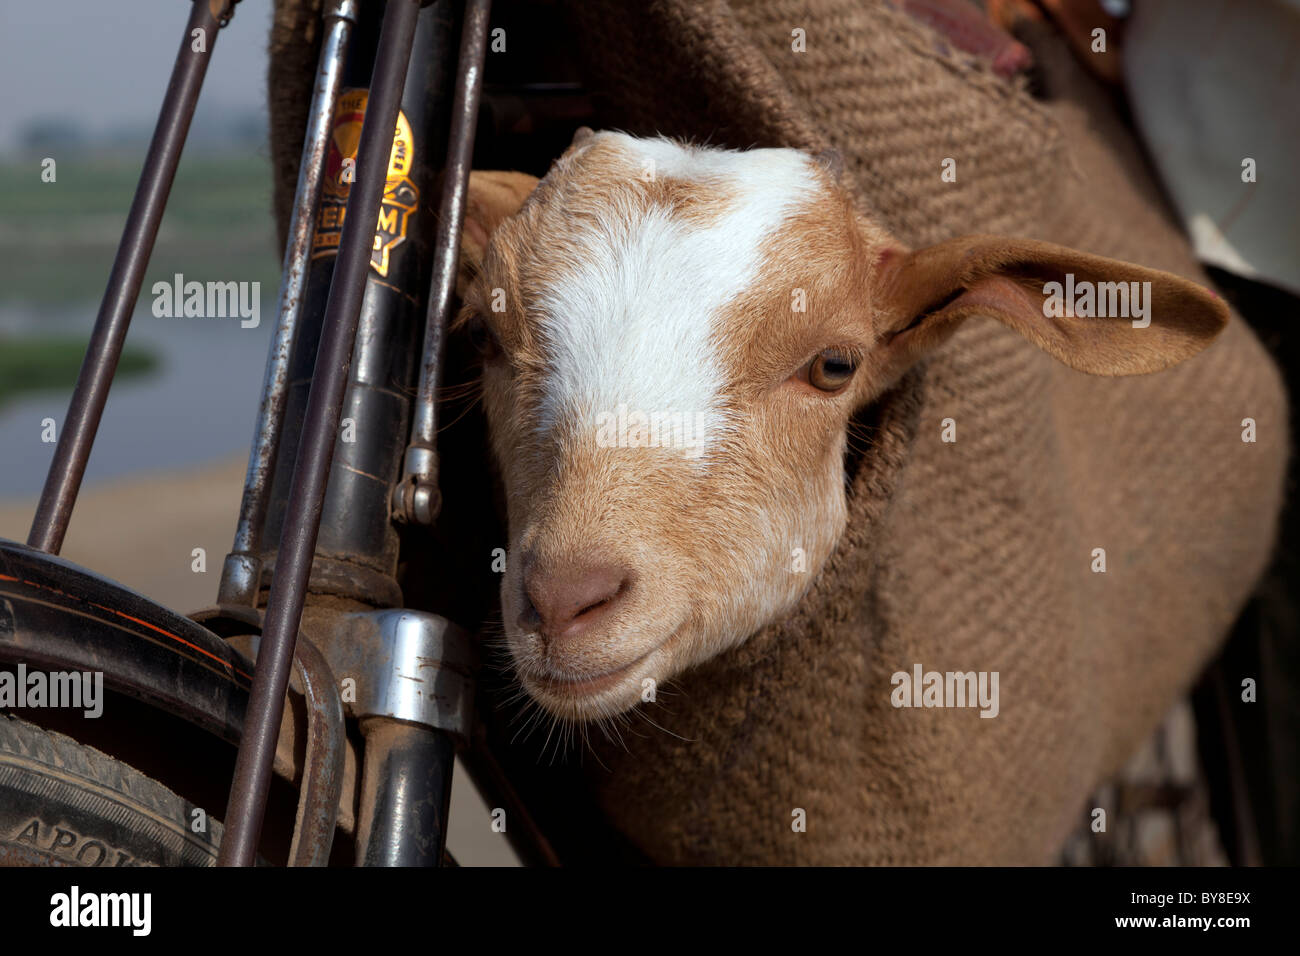 India, uttar Pradesh, Agra, close-up of a push bike and a goat in a sack on way to market Stock Photo